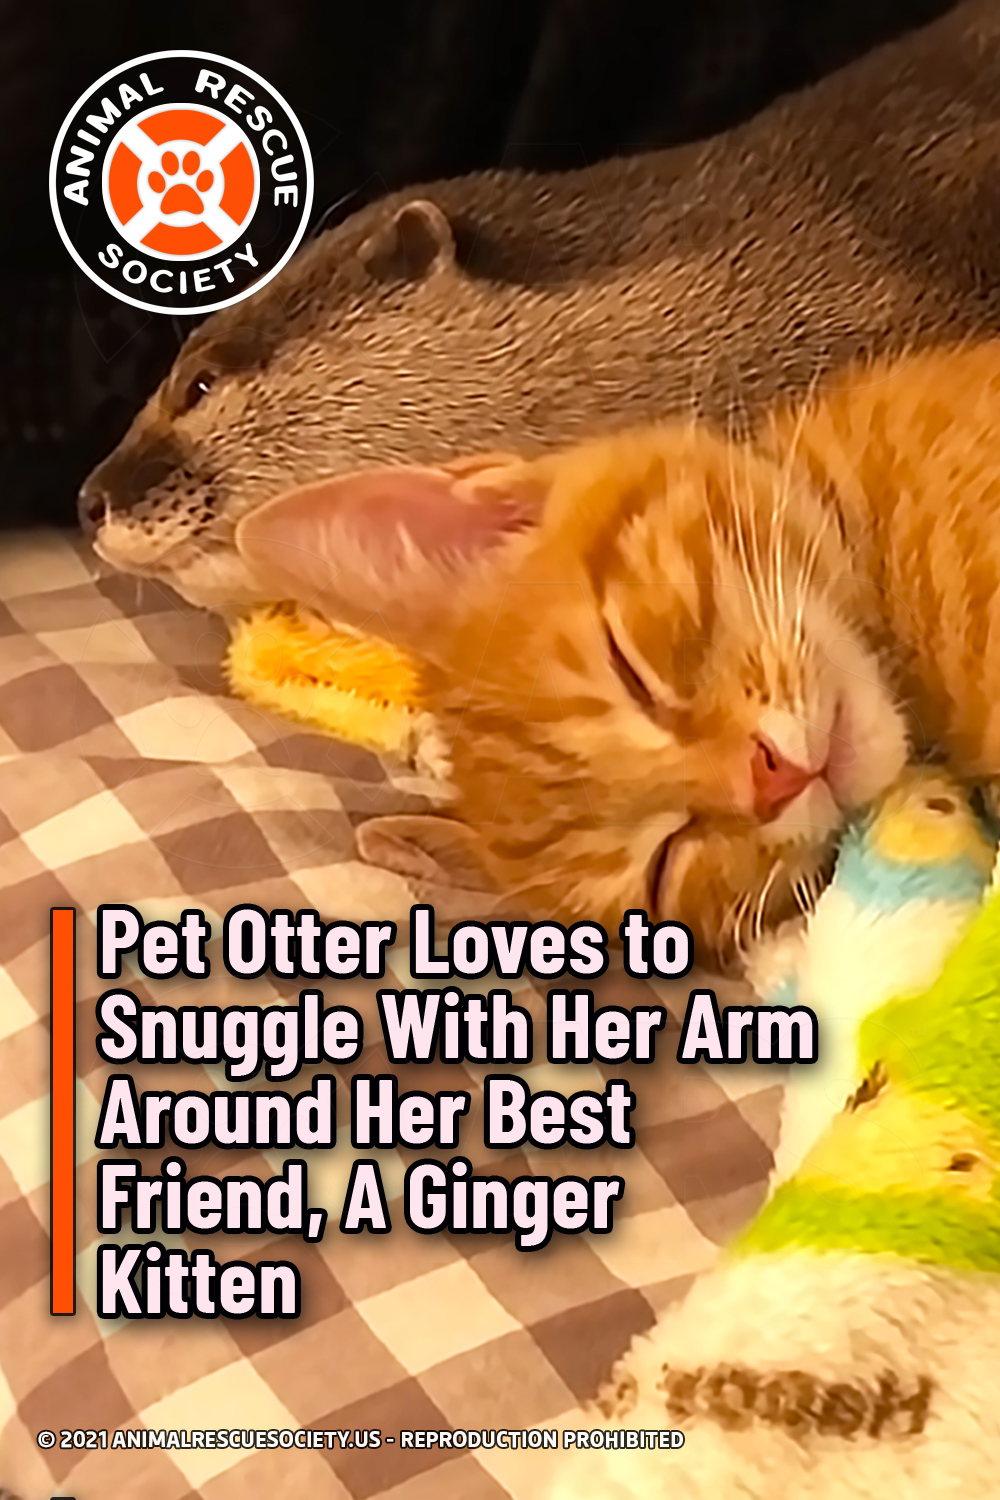 Pet Otter Loves to Snuggle With Her Arm Around Her Best Friend, A Ginger Kitten